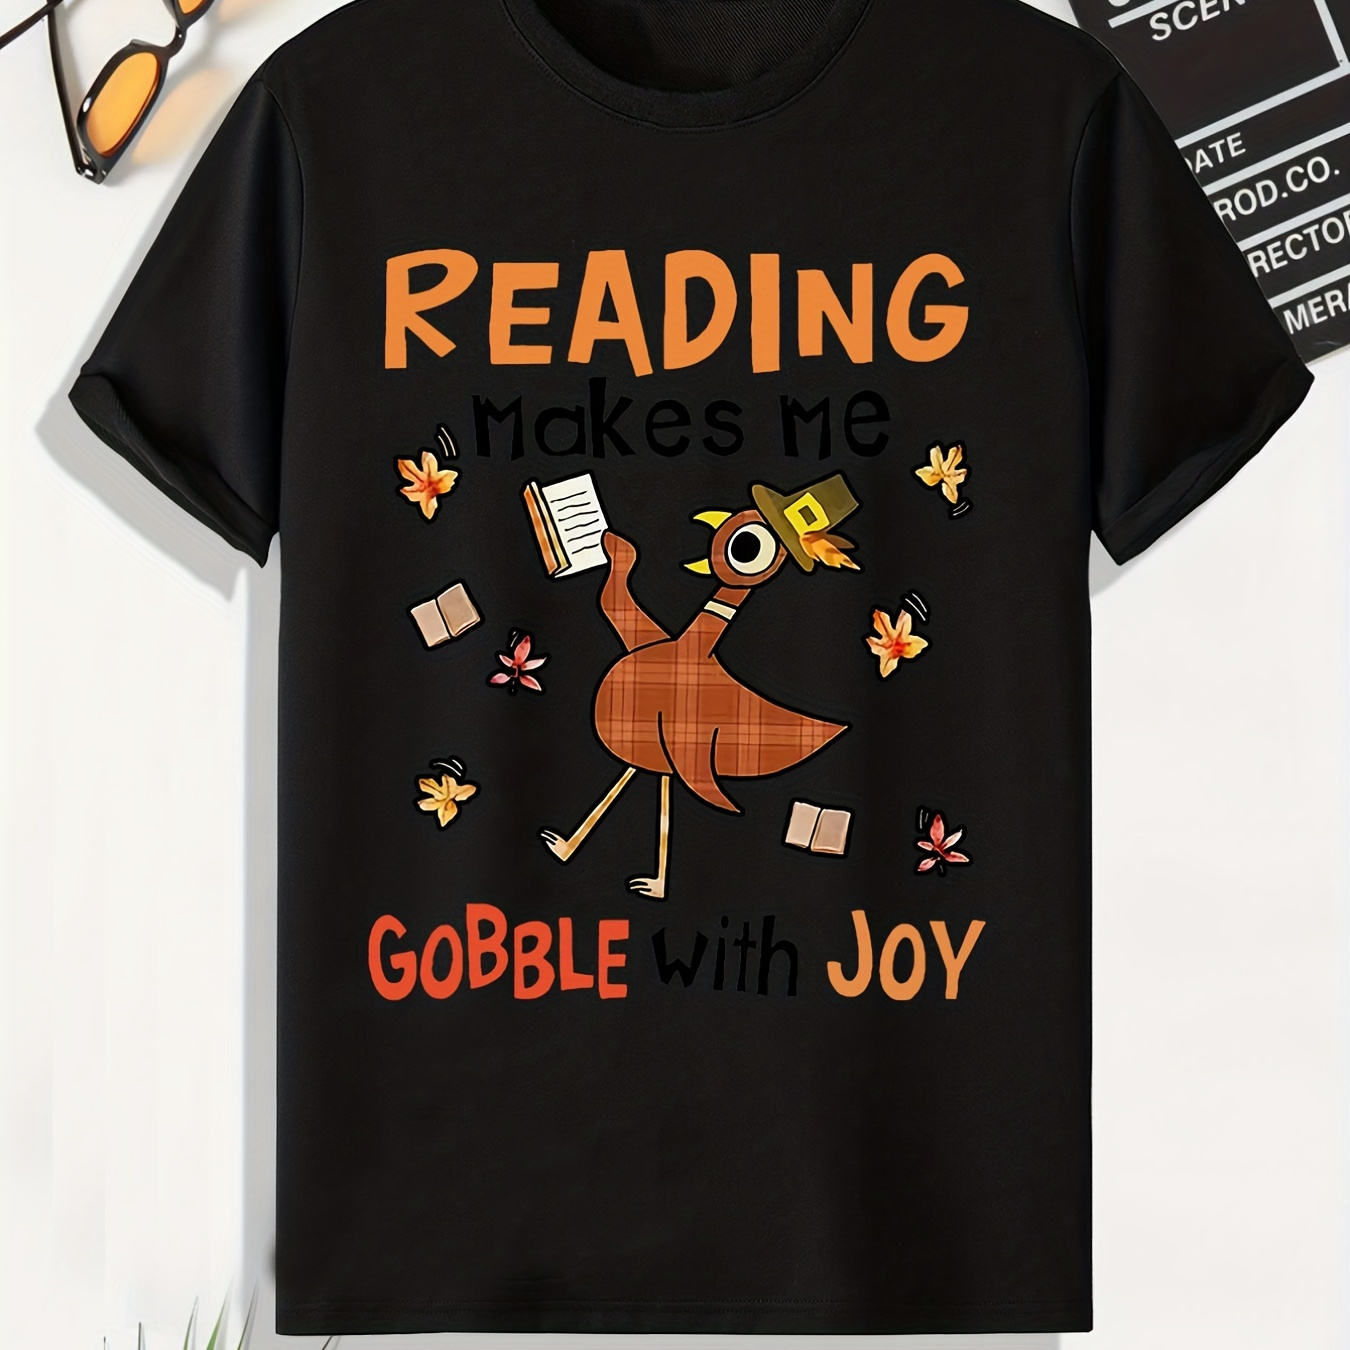 

'reading' Chick Print T Shirt, Tees For Men, Casual Short Sleeve Tshirt For Summer Spring Fall, Tops As Gifts, Bookworms